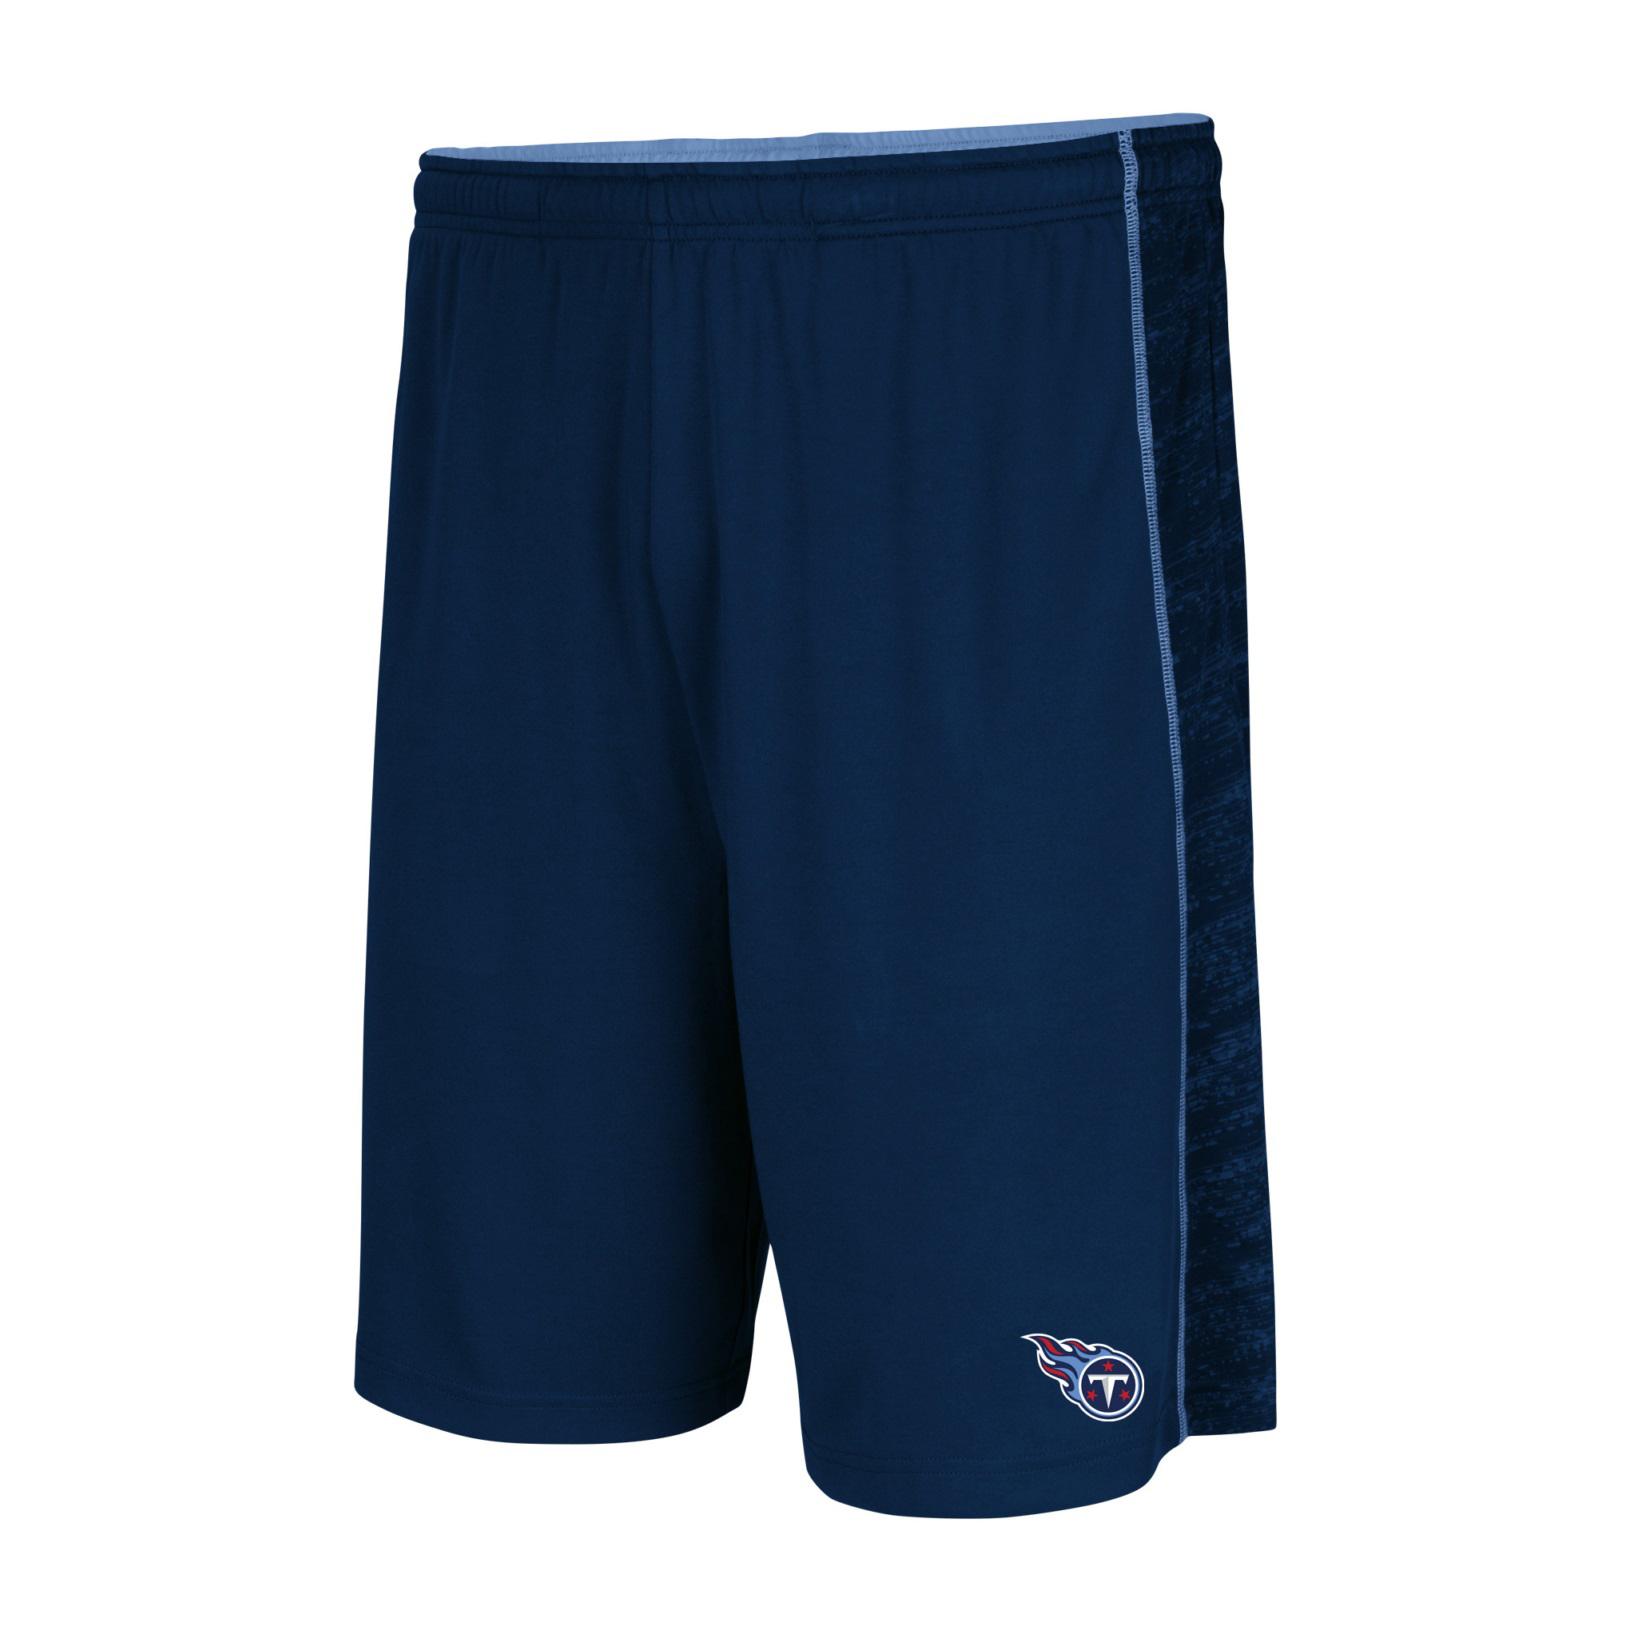 NFL Men's Athletic Shorts - Tennessee Titans